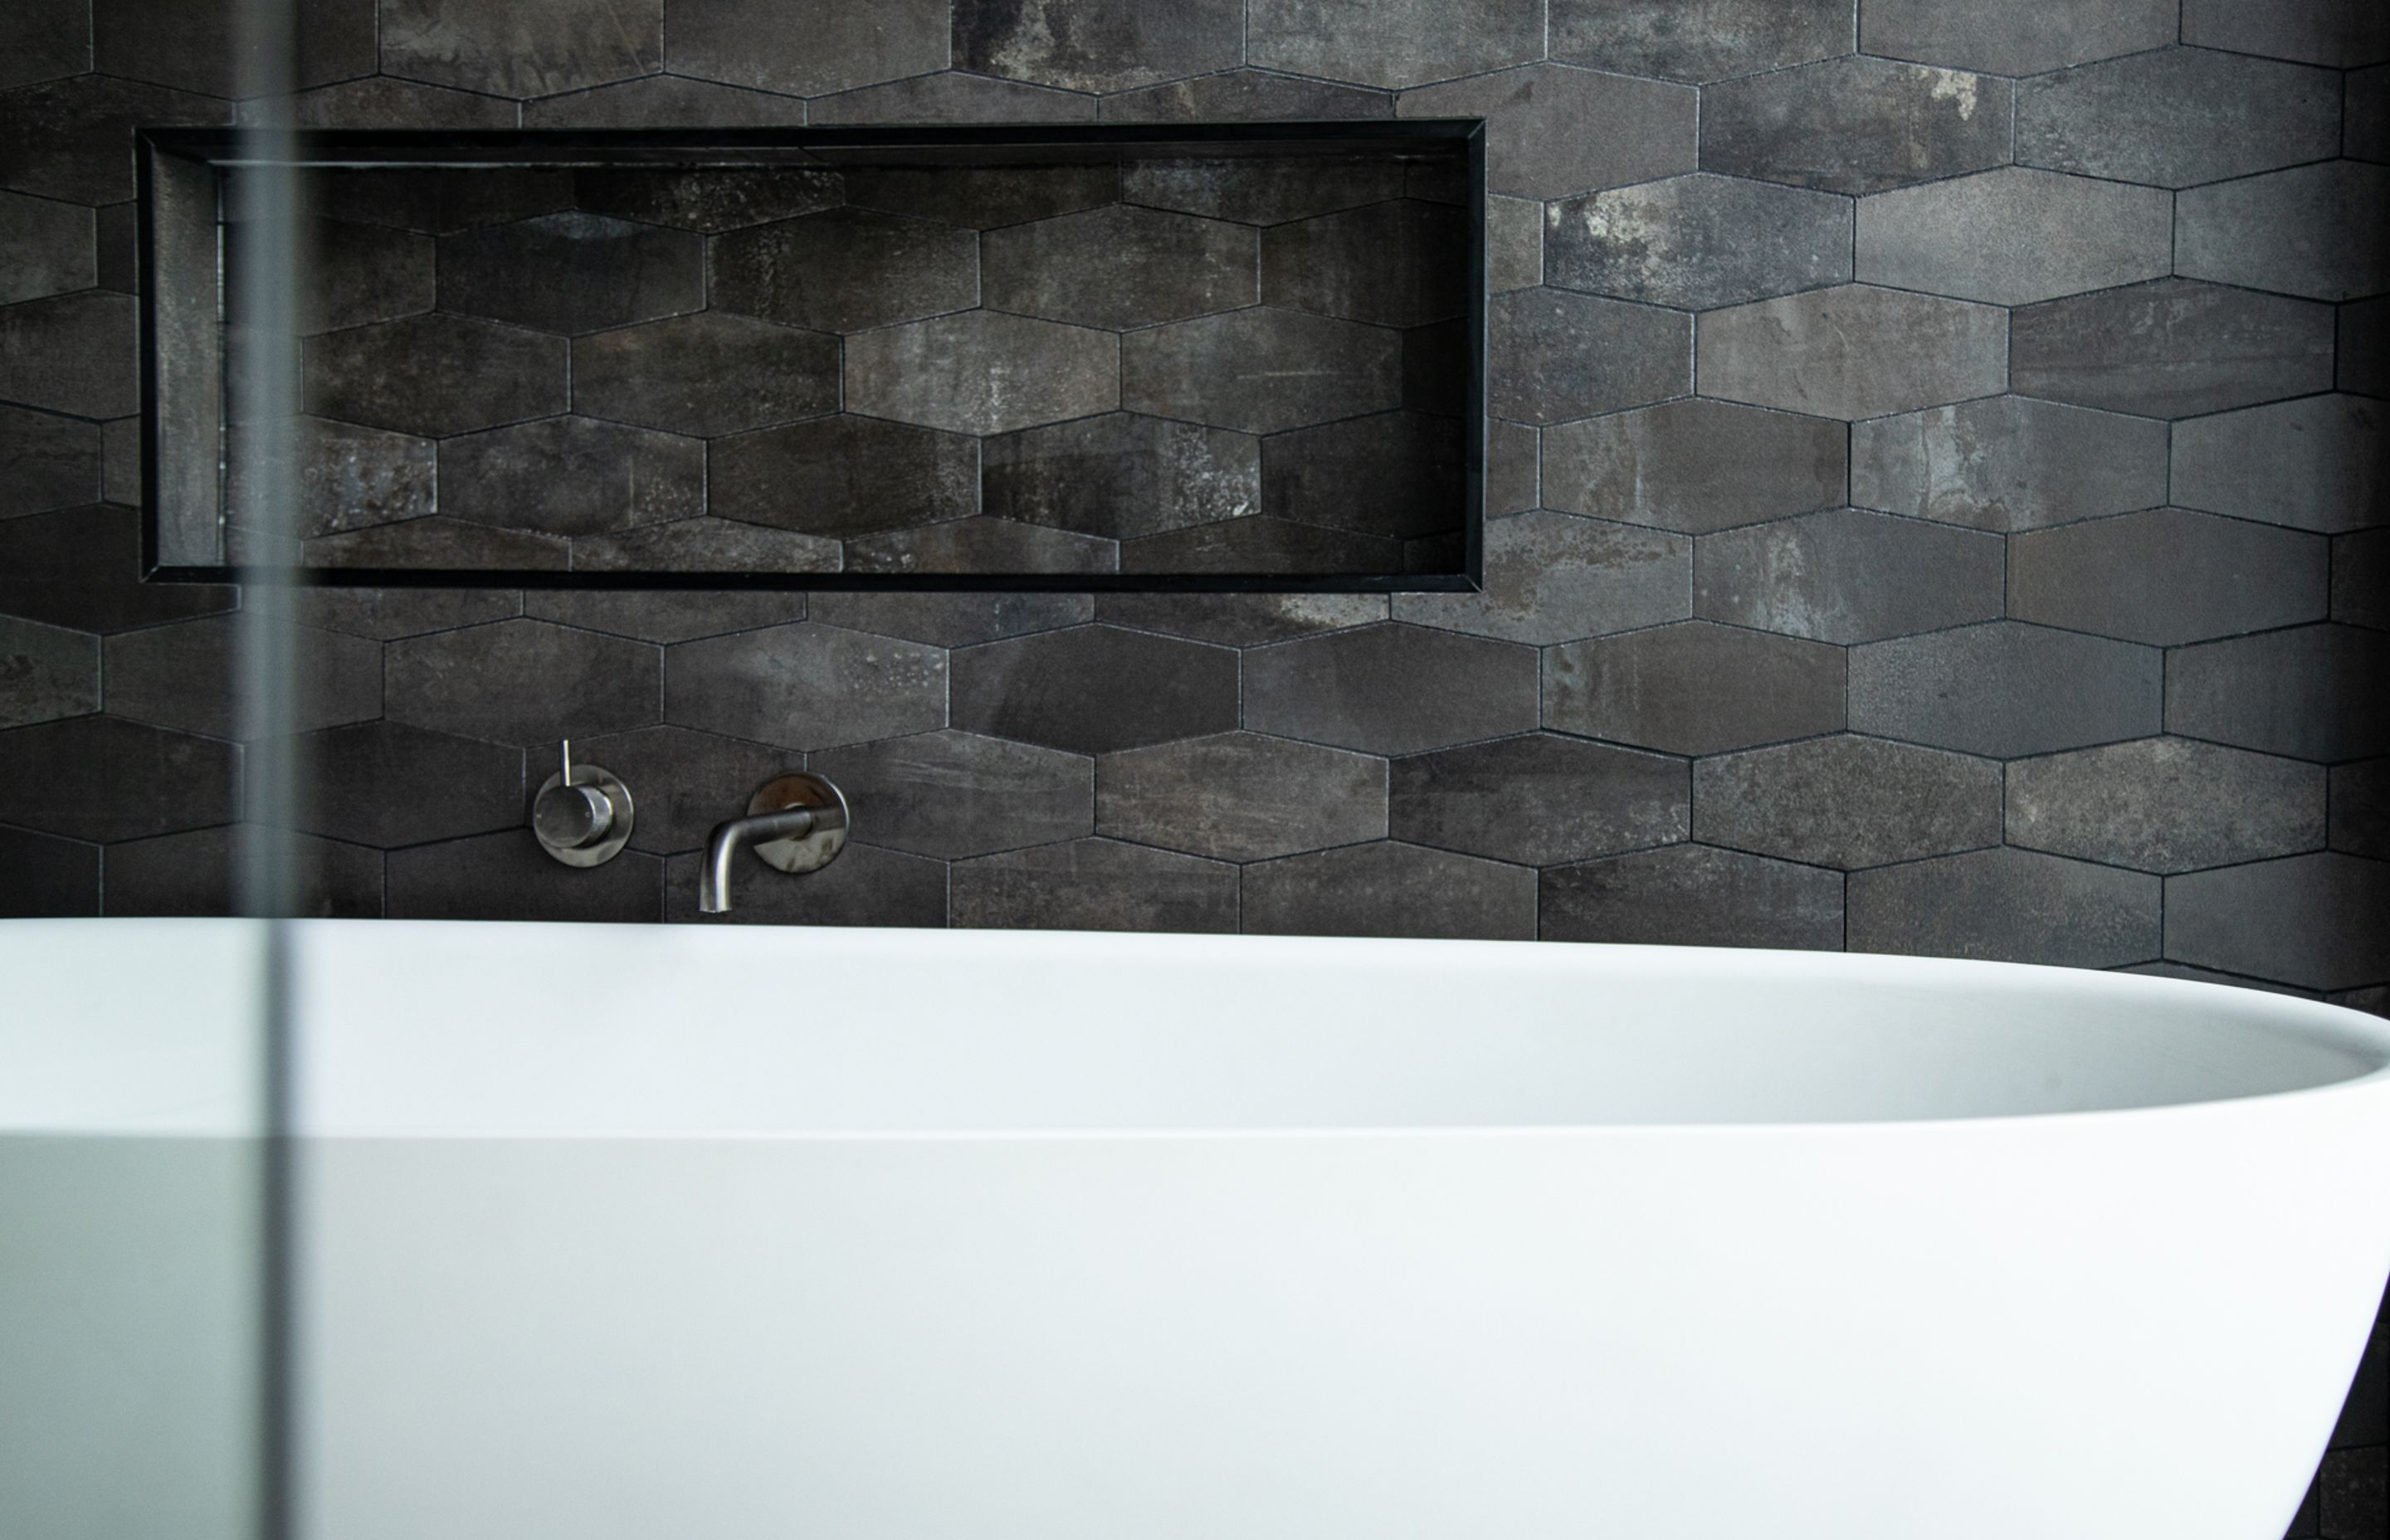 Ensuite Bathroom - contrast between light and dark, textured and smooth